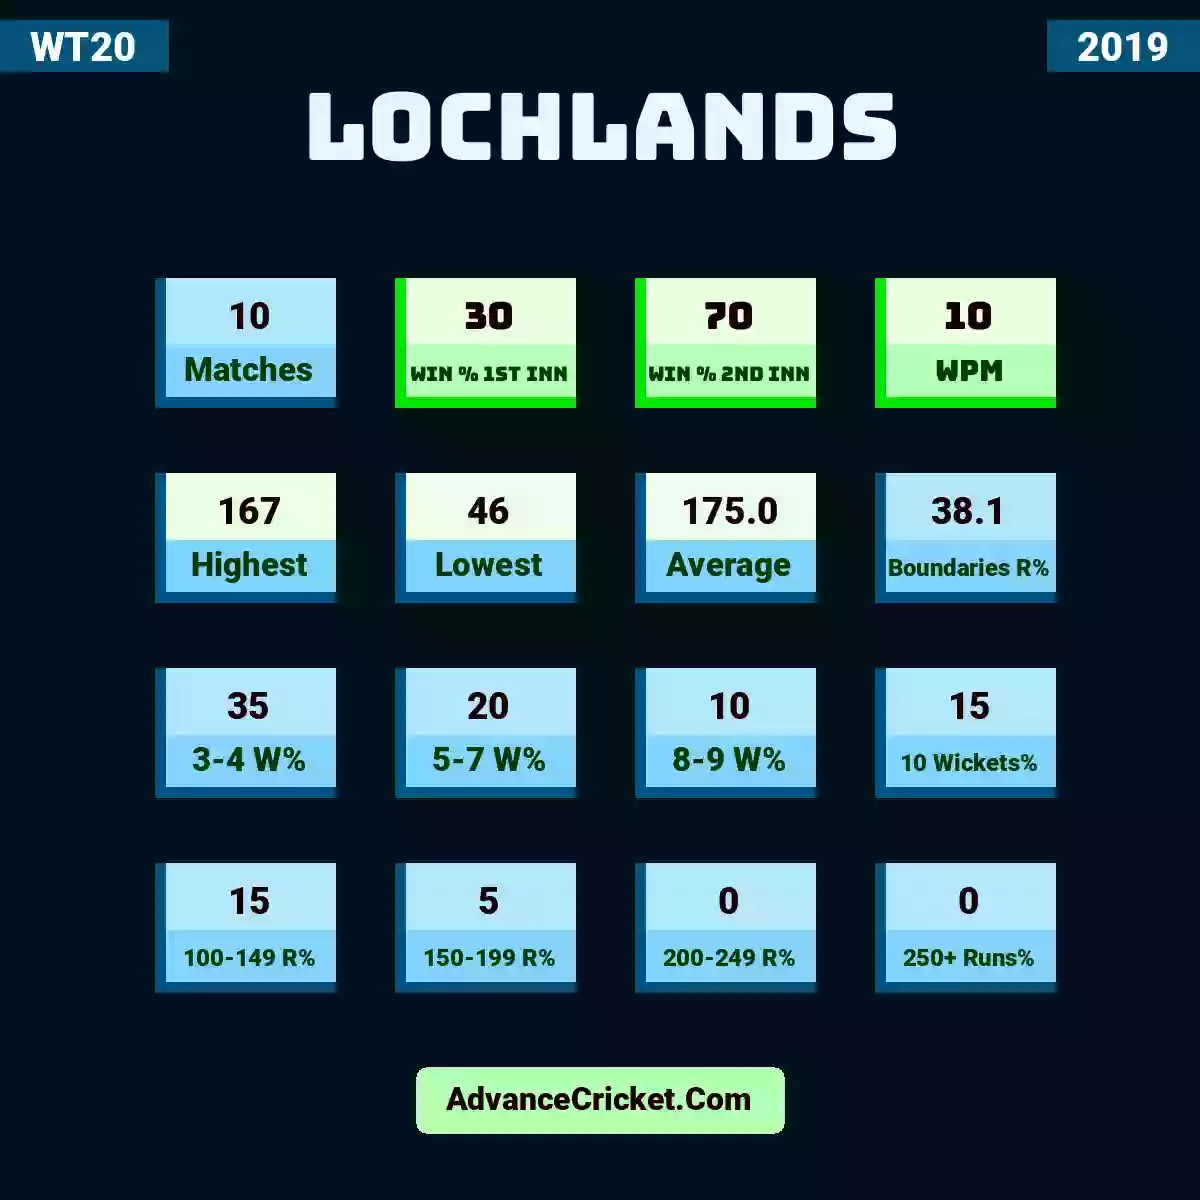 Image showing Lochlands with Matches: 10, Win % 1st Inn: 30, Win % 2nd Inn: 70, WPM: 10, Highest: 167, Lowest: 46, Average: 175.0, Boundaries R%: 38.1, 3-4 W%: 35, 5-7 W%: 20, 8-9 W%: 10, 10 Wickets%: 15, 100-149 R%: 15, 150-199 R%: 5, 200-249 R%: 0, 250+ Runs%: 0.